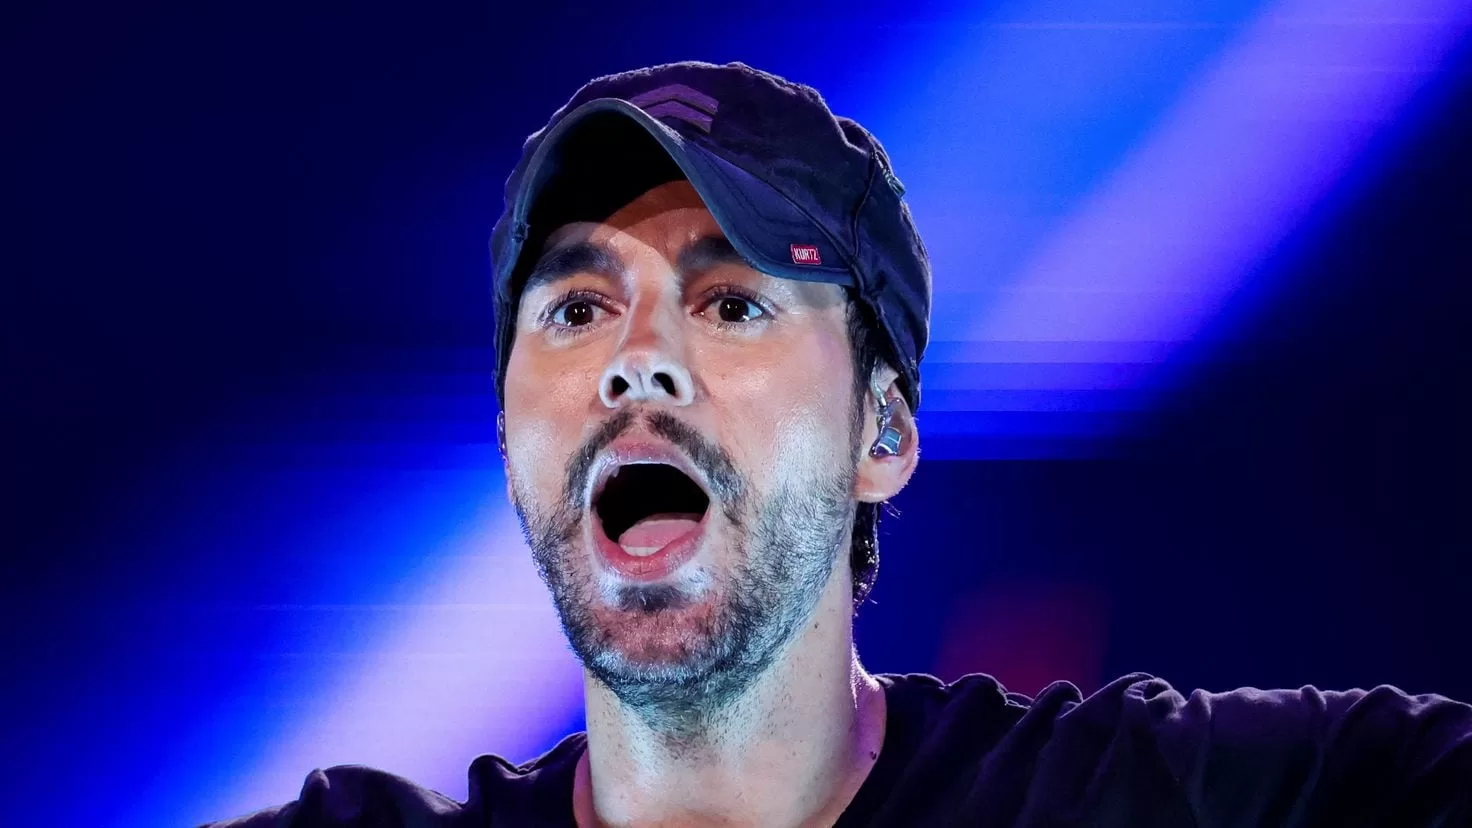 Enrique Iglesias sells his entire musical catalog for more than one hundred million dollars
